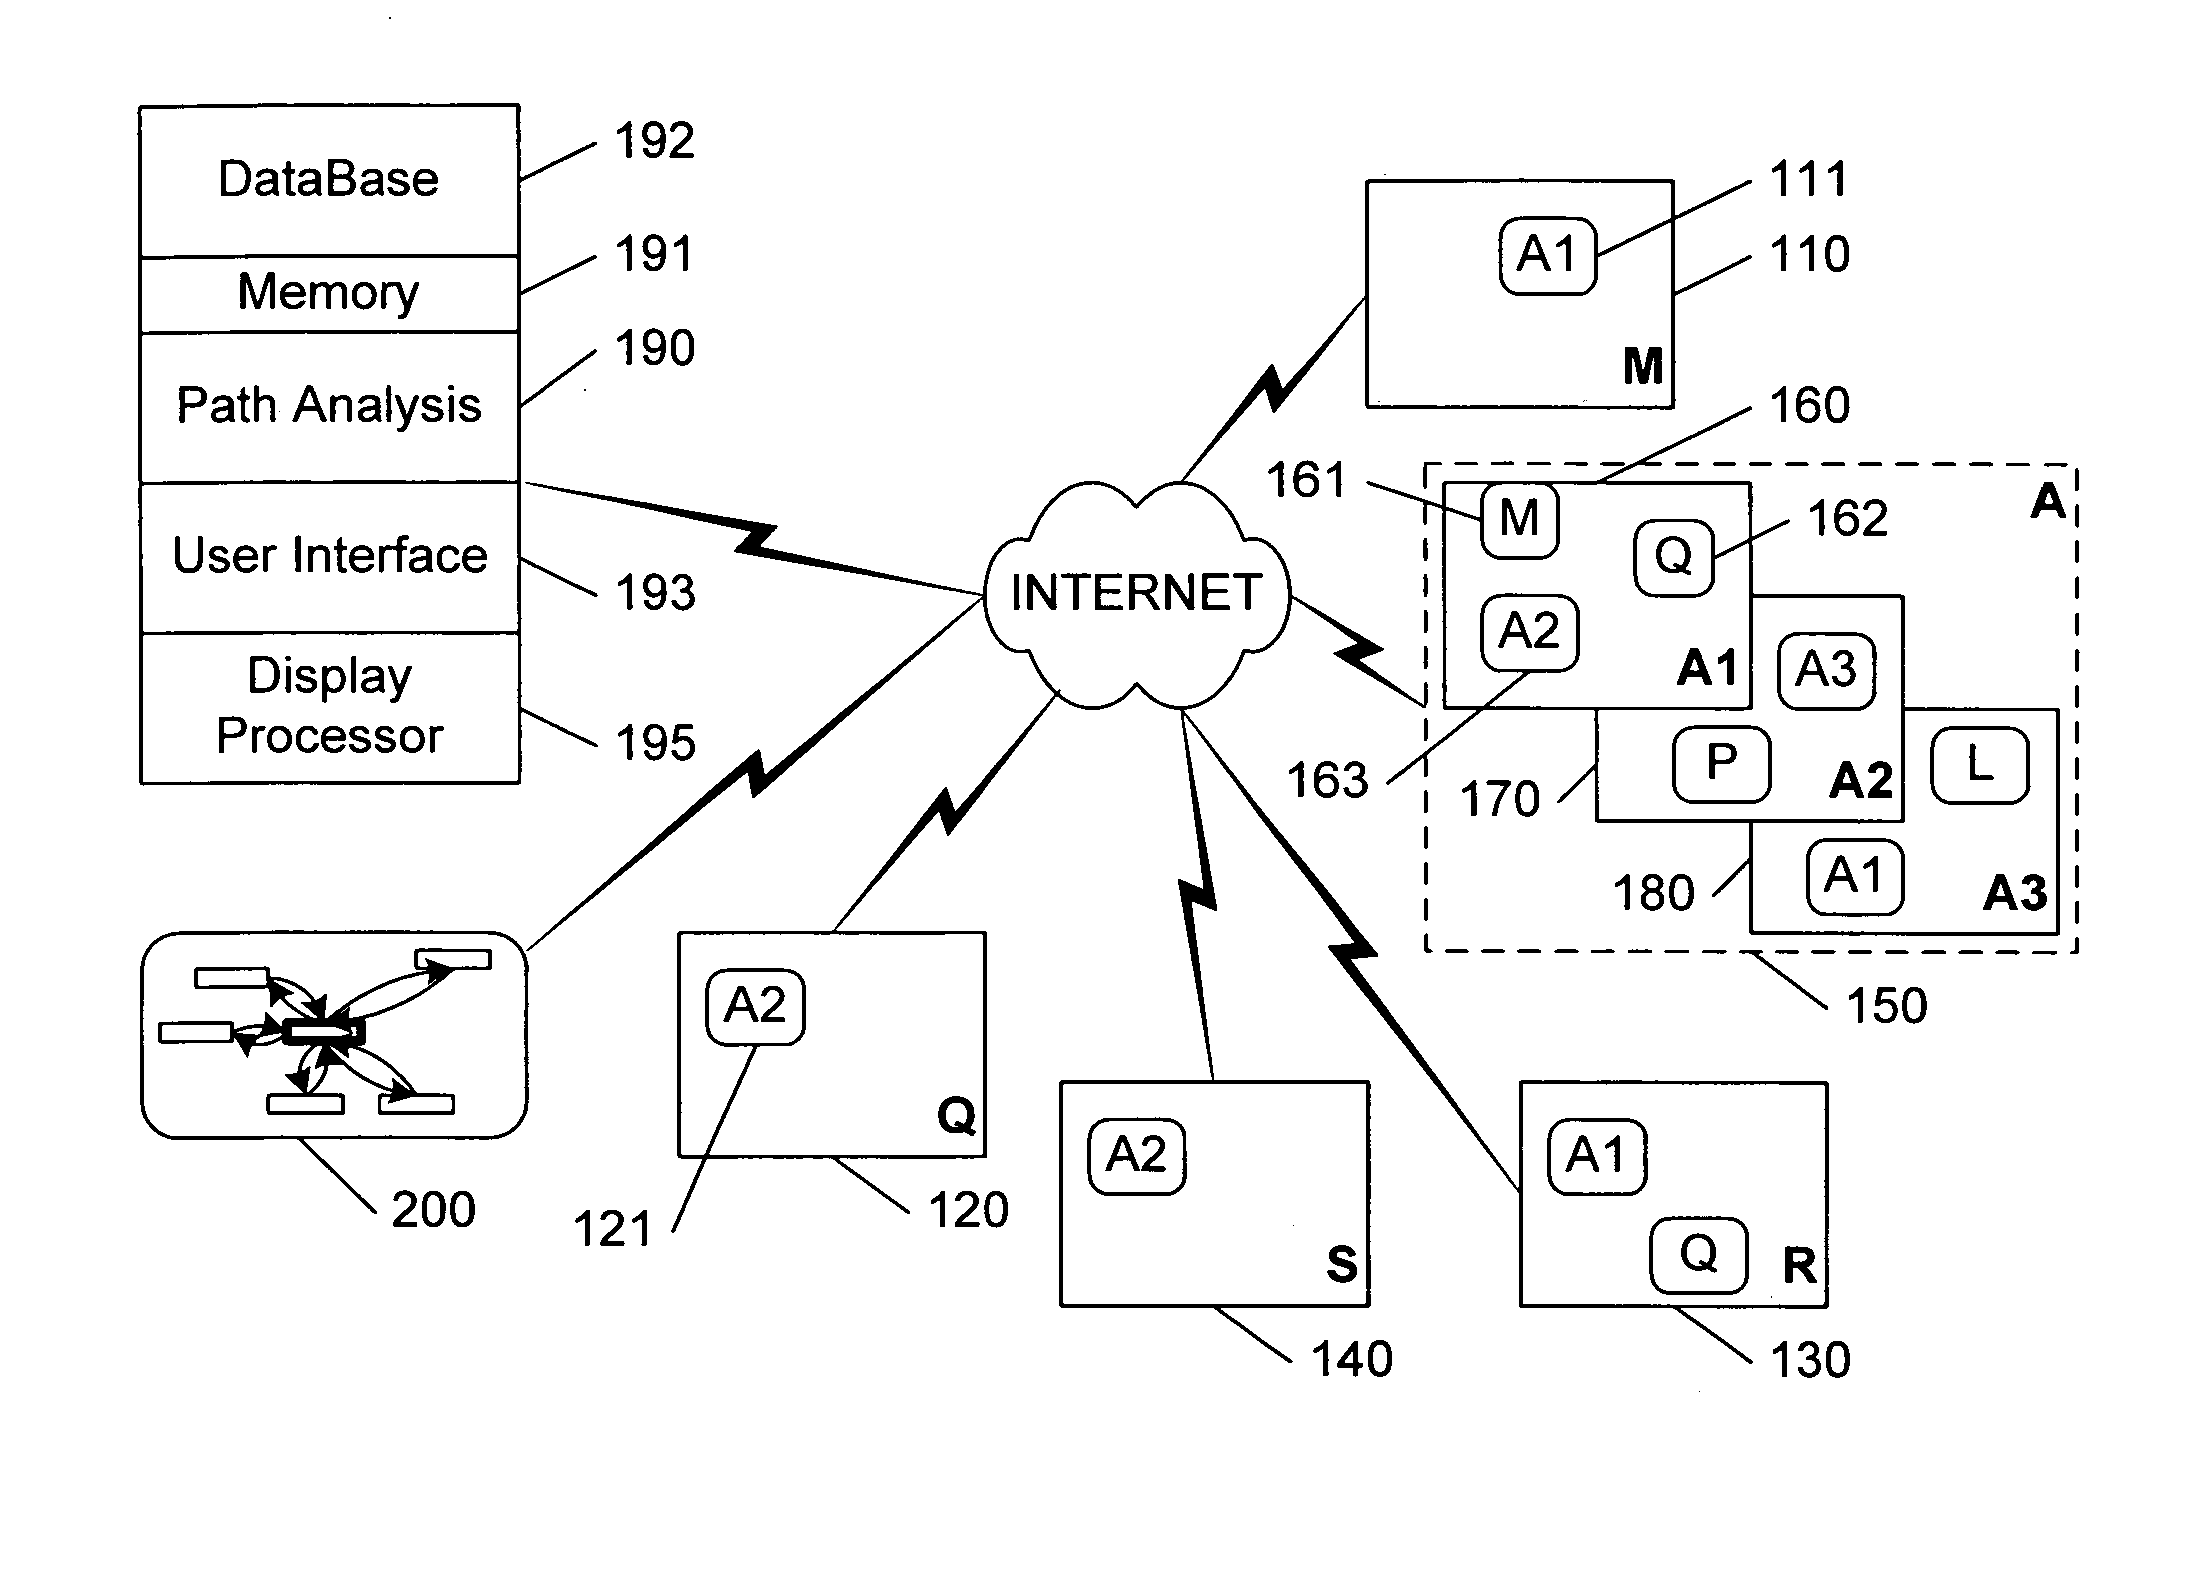 Web-site performance analysis system and method of providing a web-site performance analysis service